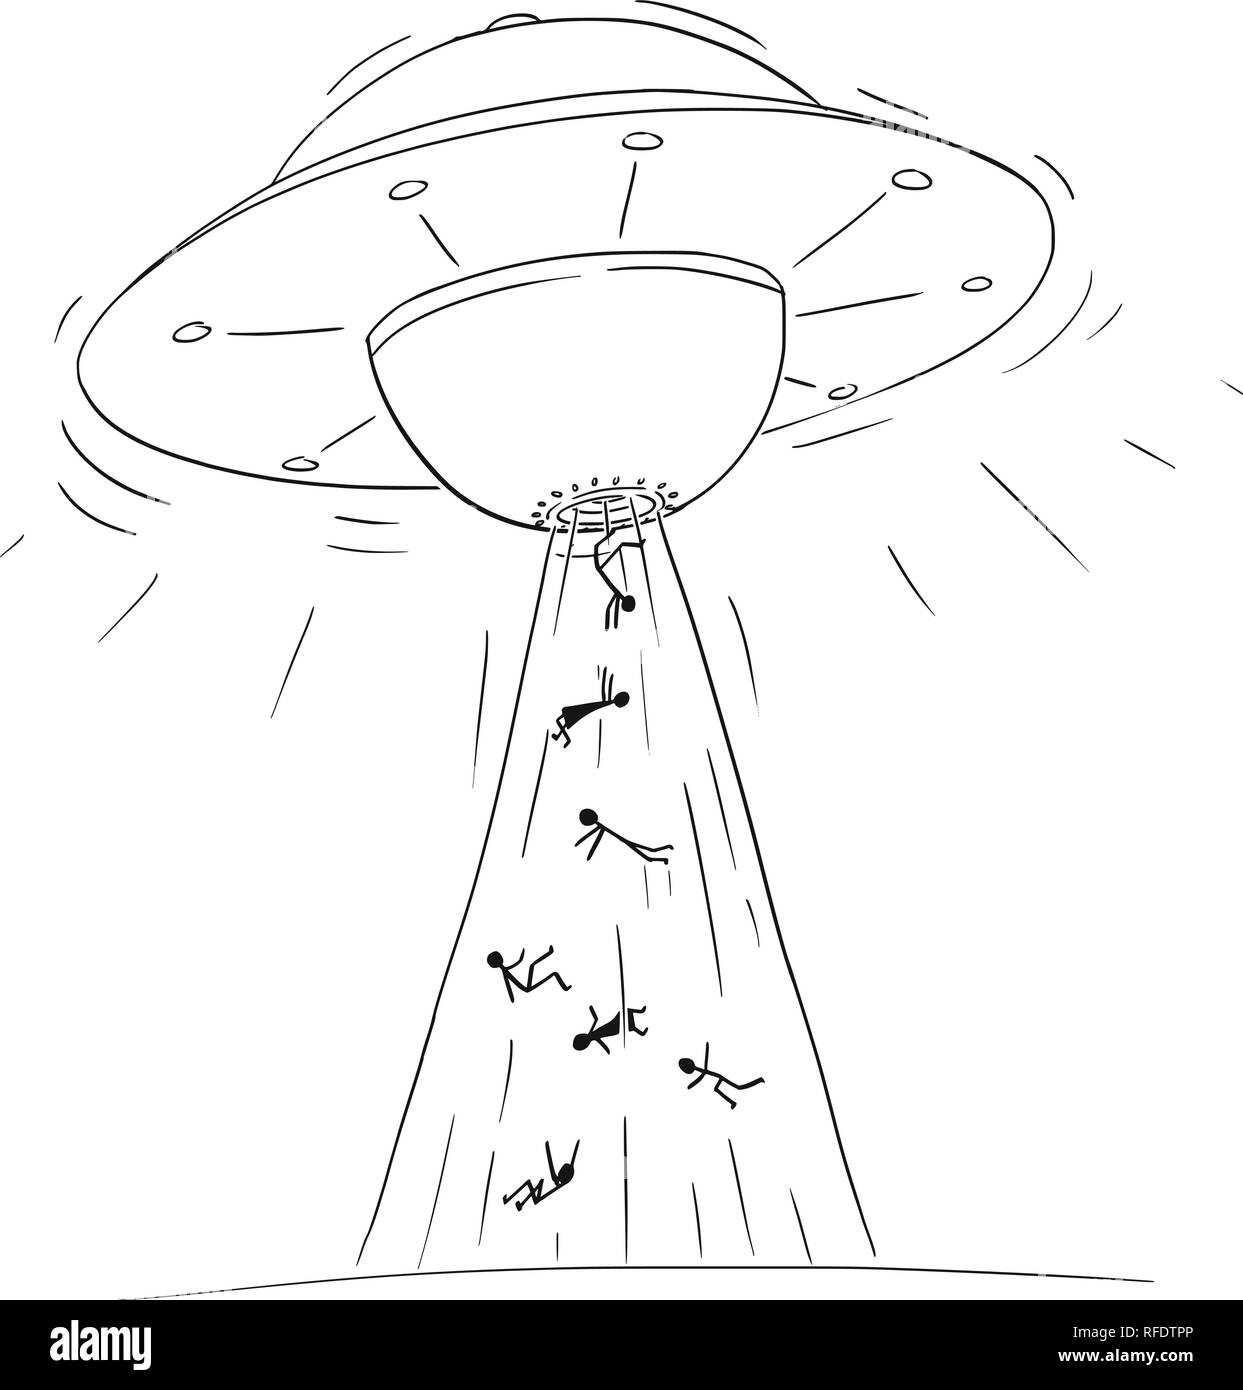 Cartoon Drawing of Alien Space Ship or UFO Abducting People in Ray of Light Stock Vector